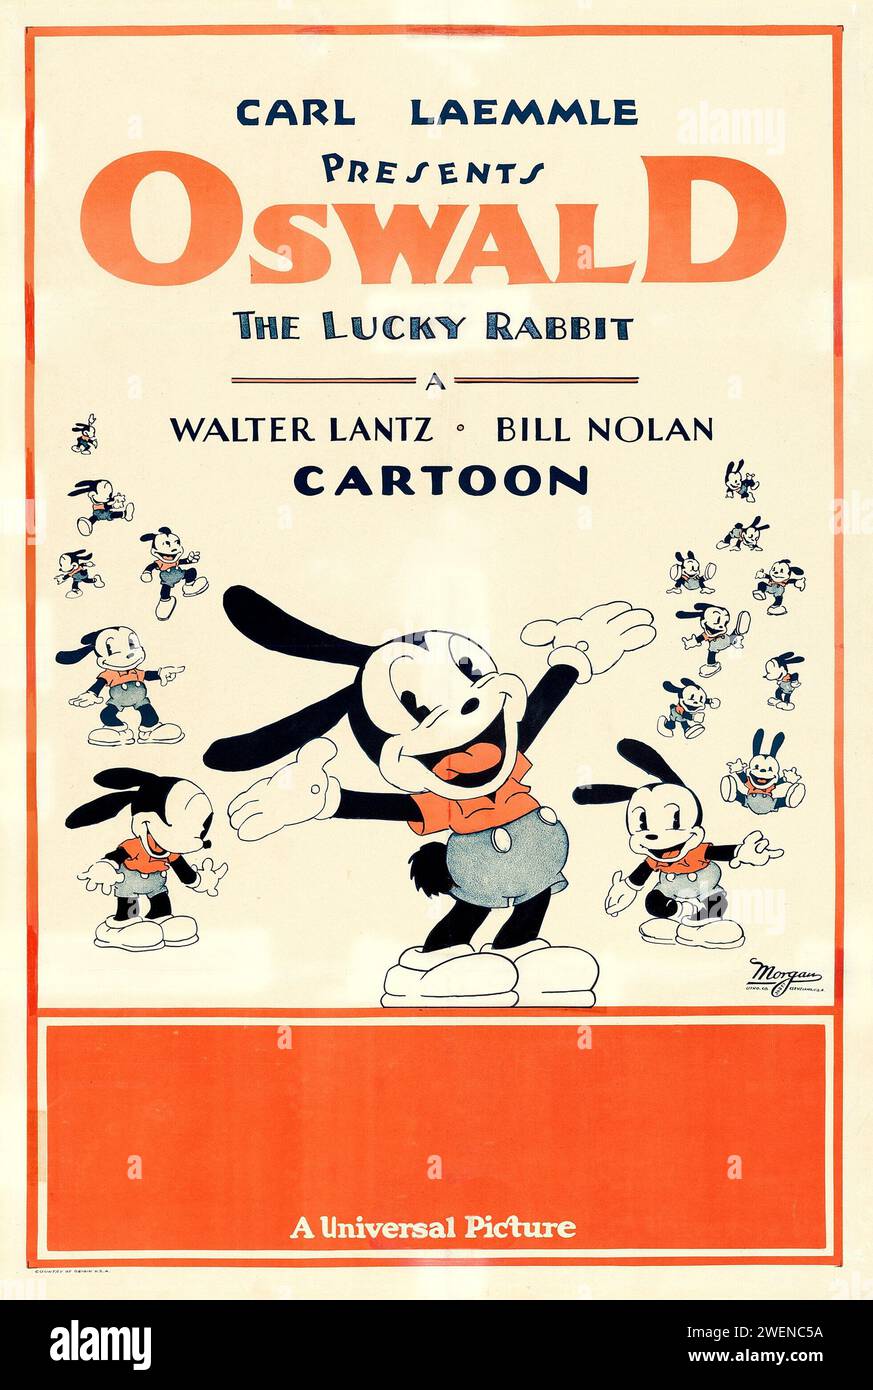 Oswald the Lucky Rabbit (Carl Laemmle, Universal, 1934) Walter Lantz, Bill Nolan Cartoon - Oswald the Lucky Rabbit, a series of animated cartoon shorts created by Walt Disney for the Universal Pictures Corporation Stock Photo